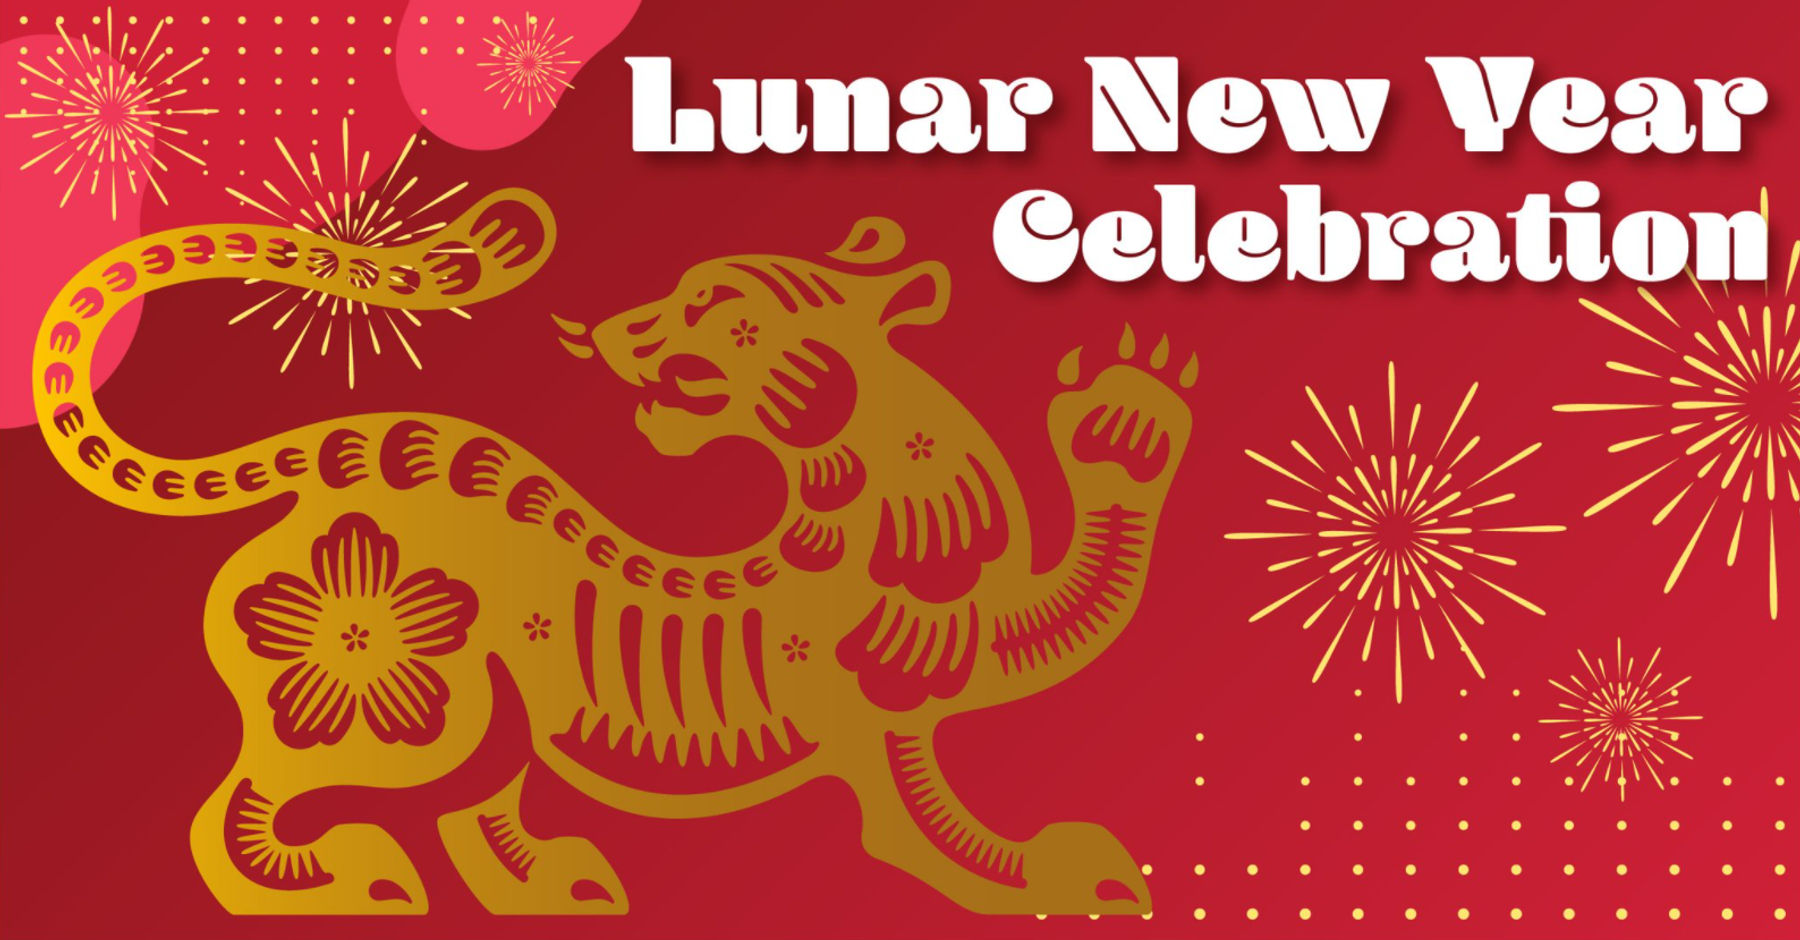 Lunar new year moves into the retail mainstream – Orange County Register